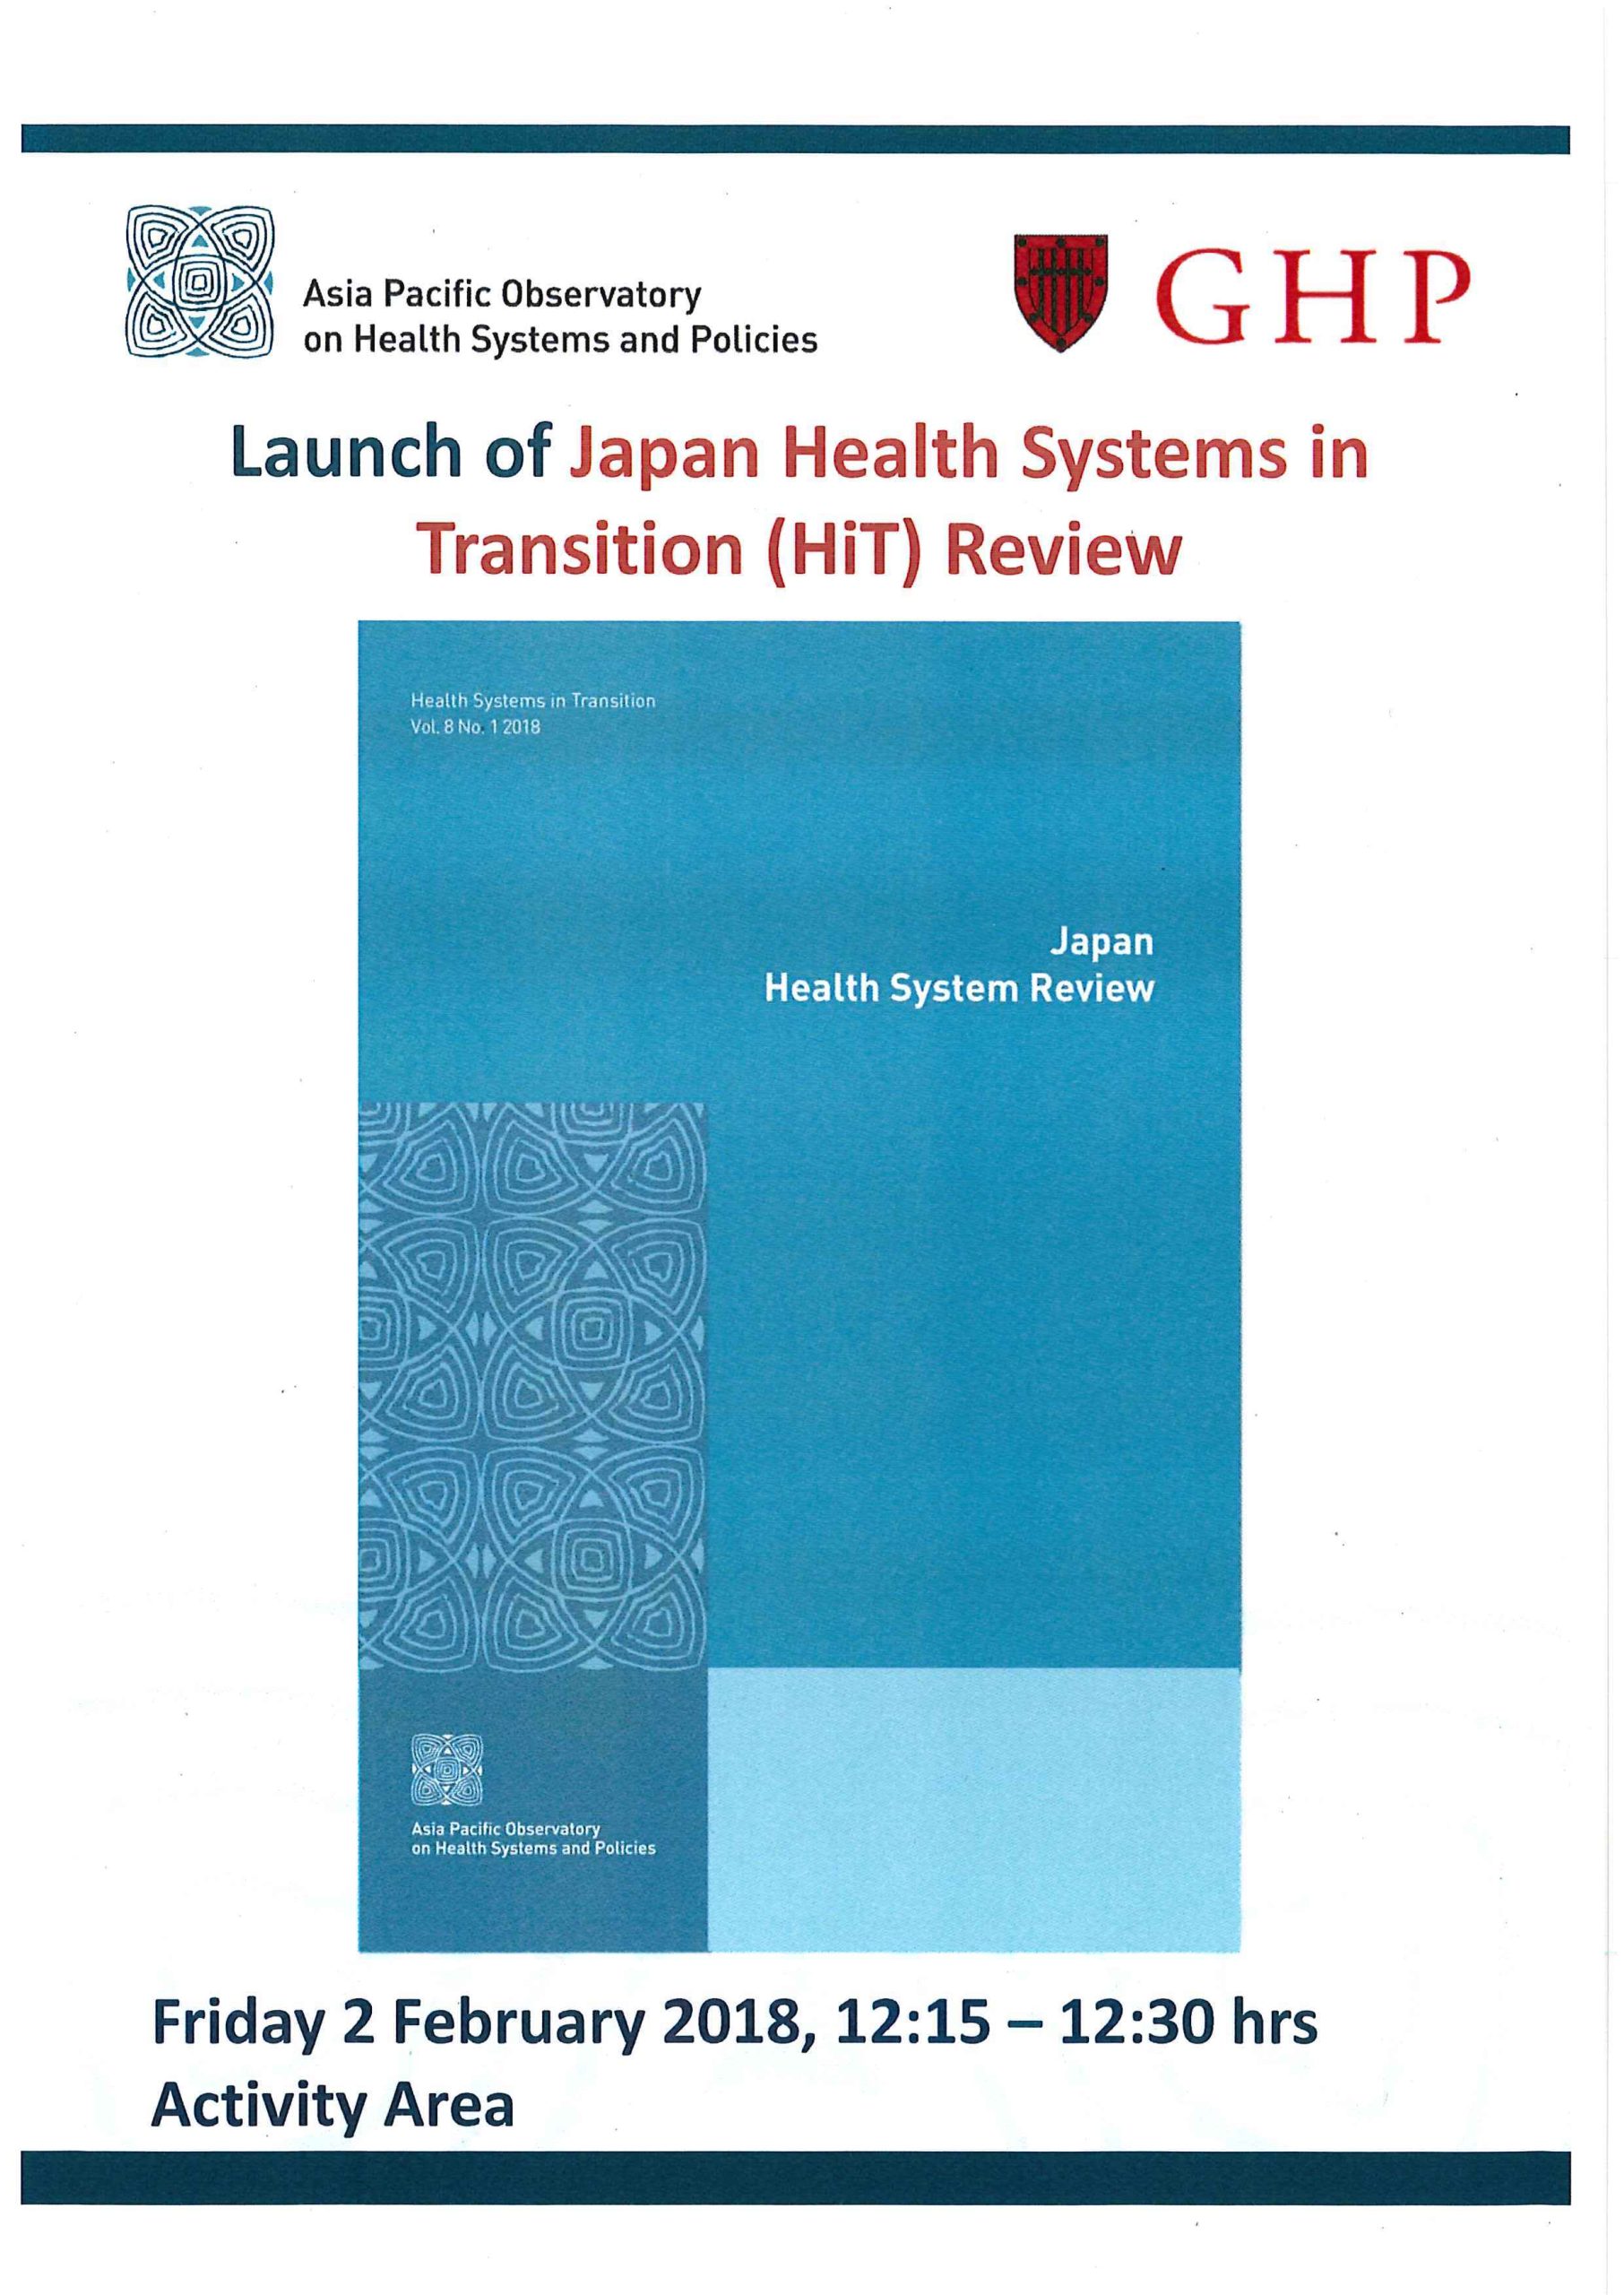 Launch of Japan Health Systems in Transition (HiT) Review @ PMAC 2018